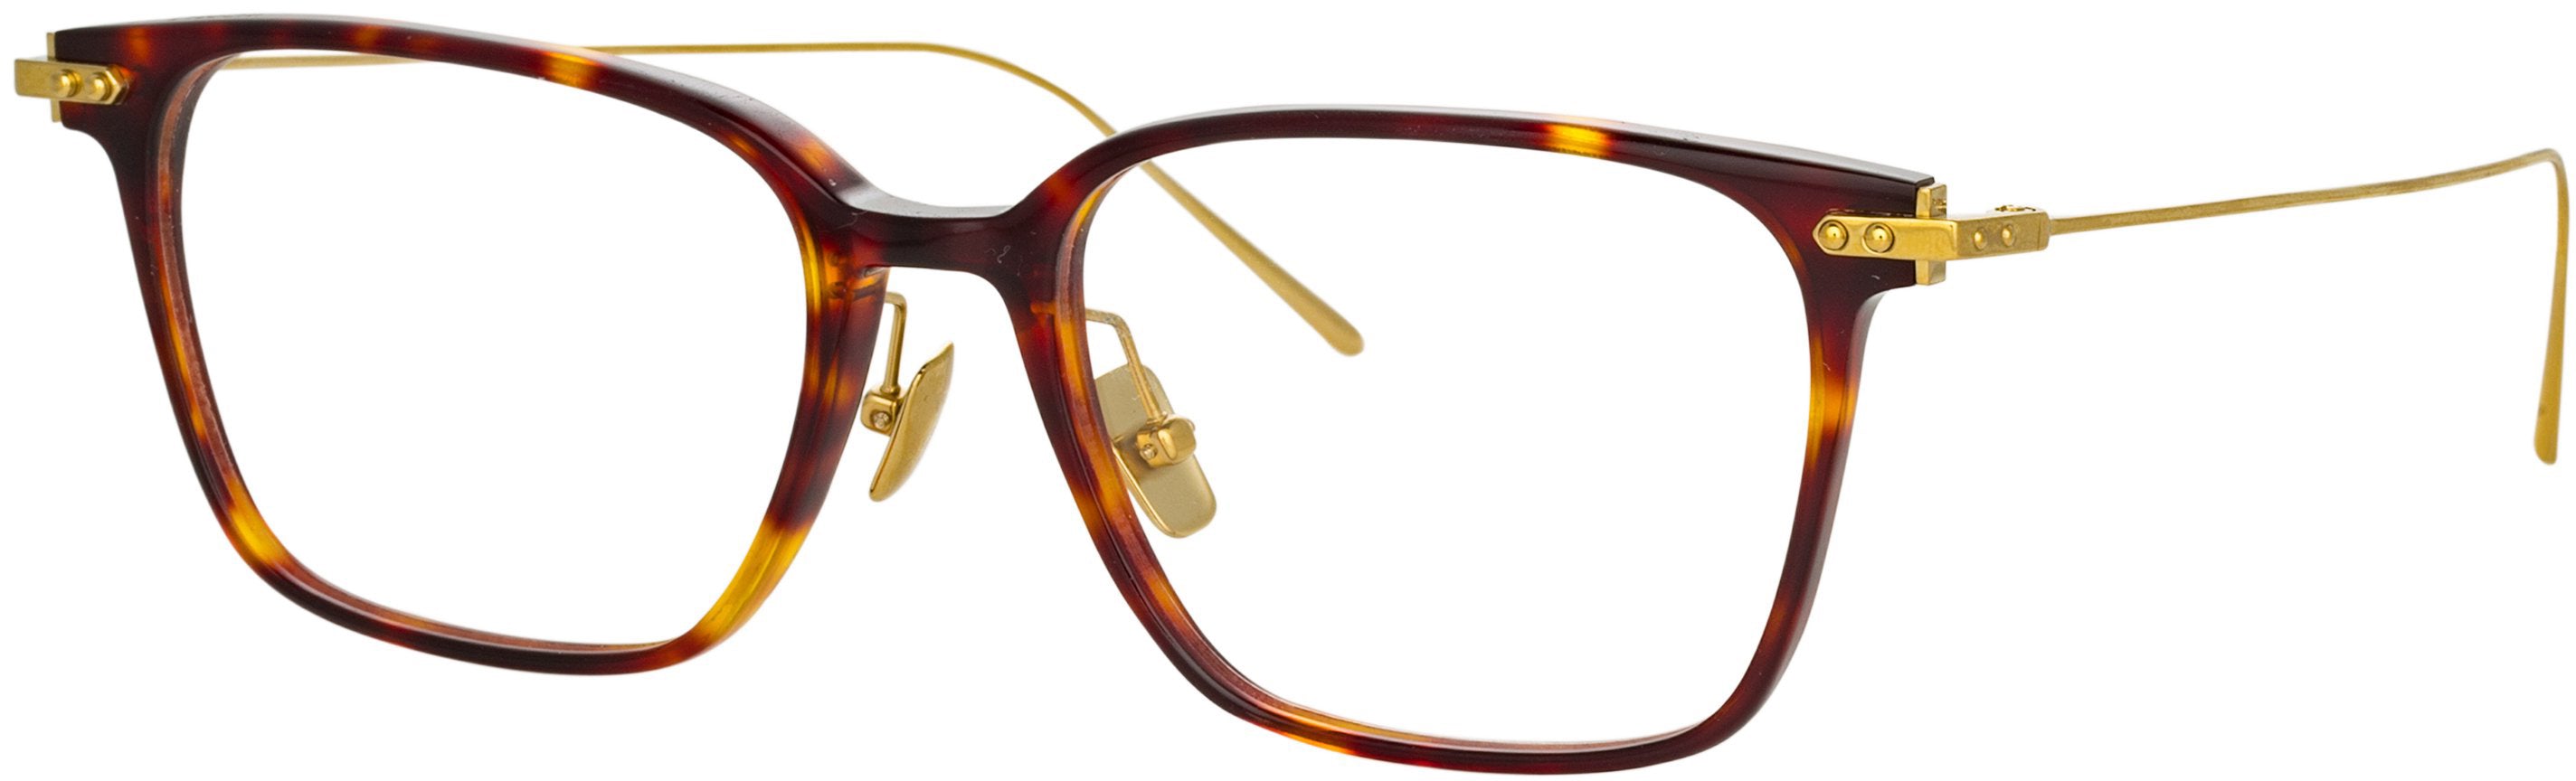 Color_LF37C2OPT - Gehry Rectangular Optical Frame in Tortoiseshell and Yellow Gold